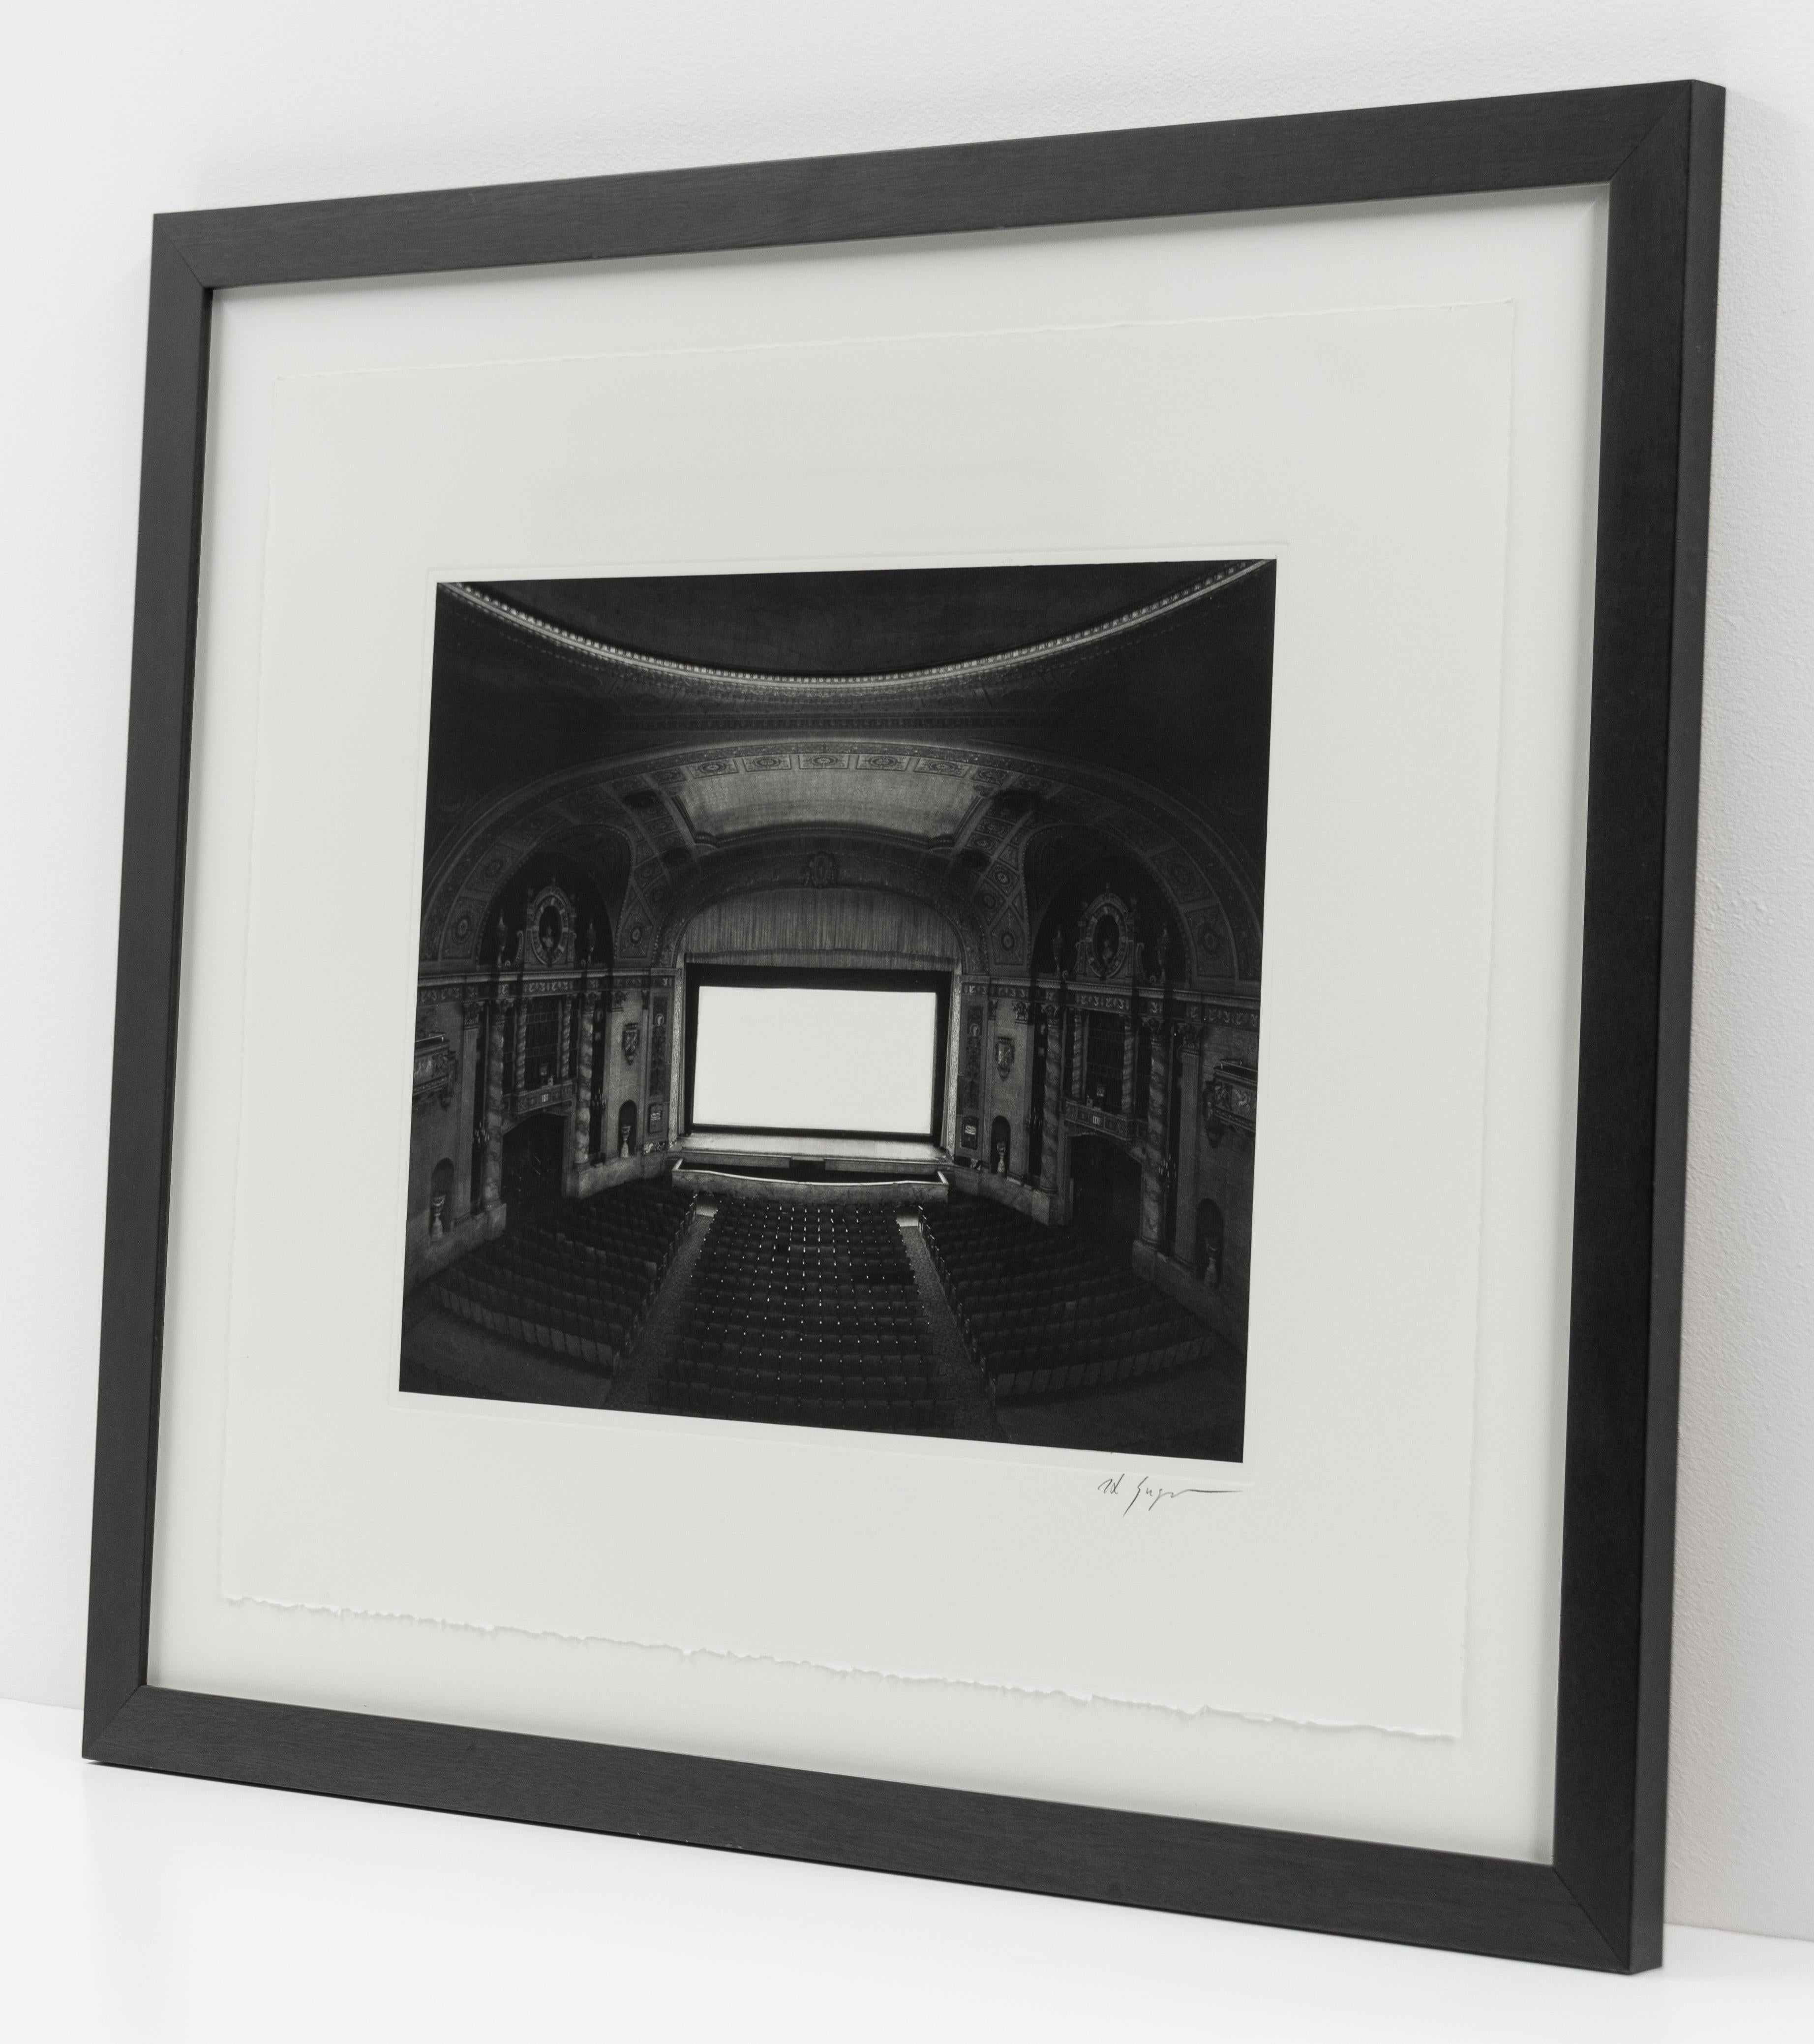 Theatres
2002

Signed and numbered, l.r.

Photogravure (Edition of 1000)

11 x 14 inches

This work by Hiroshi Sugimoto is offered by CLAMP in New York City.